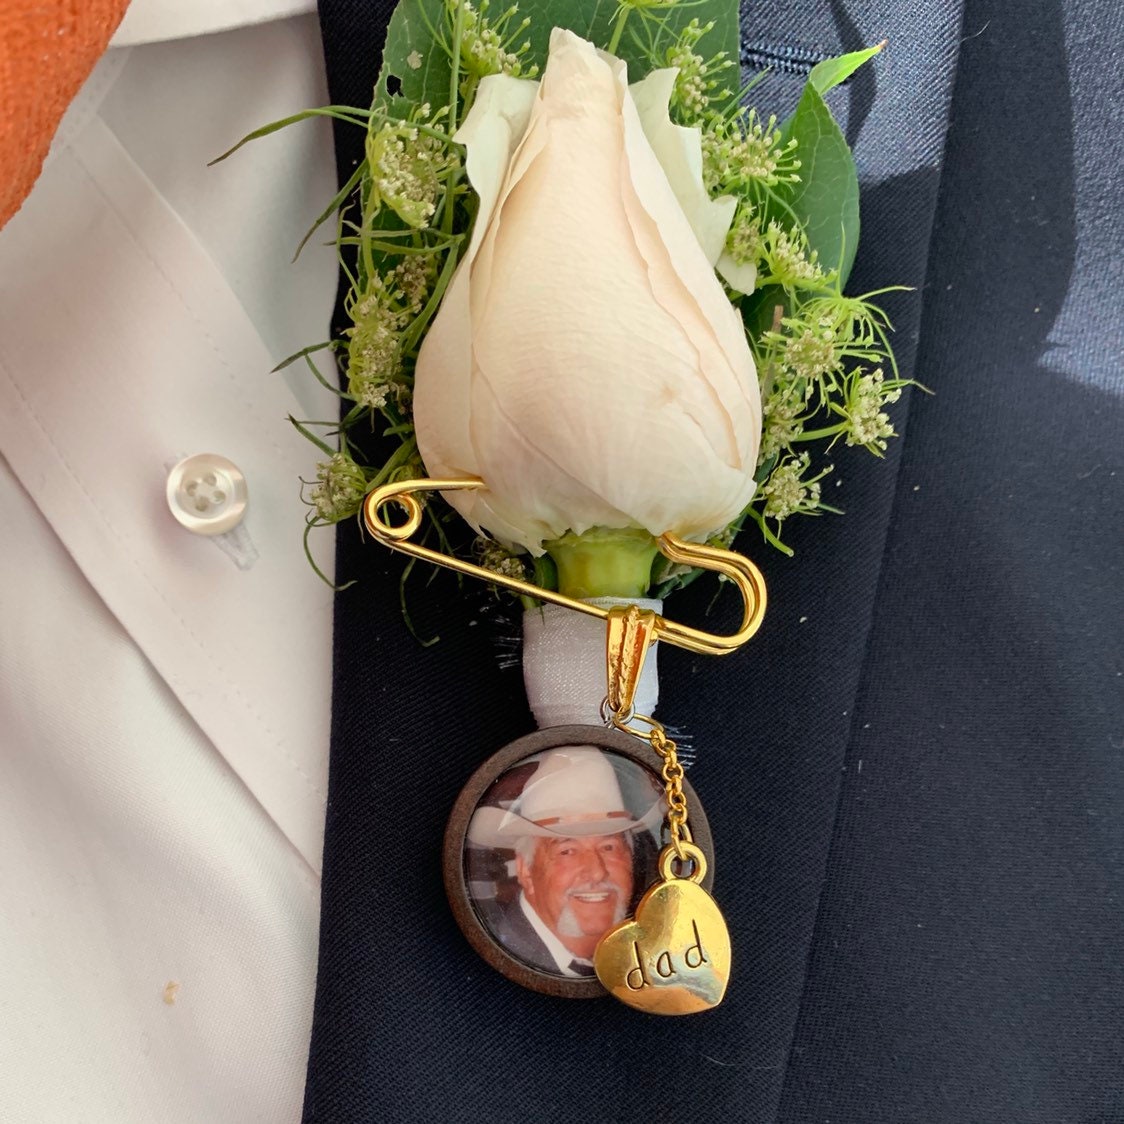 Grooms Boutonniere Memorial Wedding Photo charm Keepsake - Carry the memory of your loved ones - Great gift for groomsman DIY or Custom Made